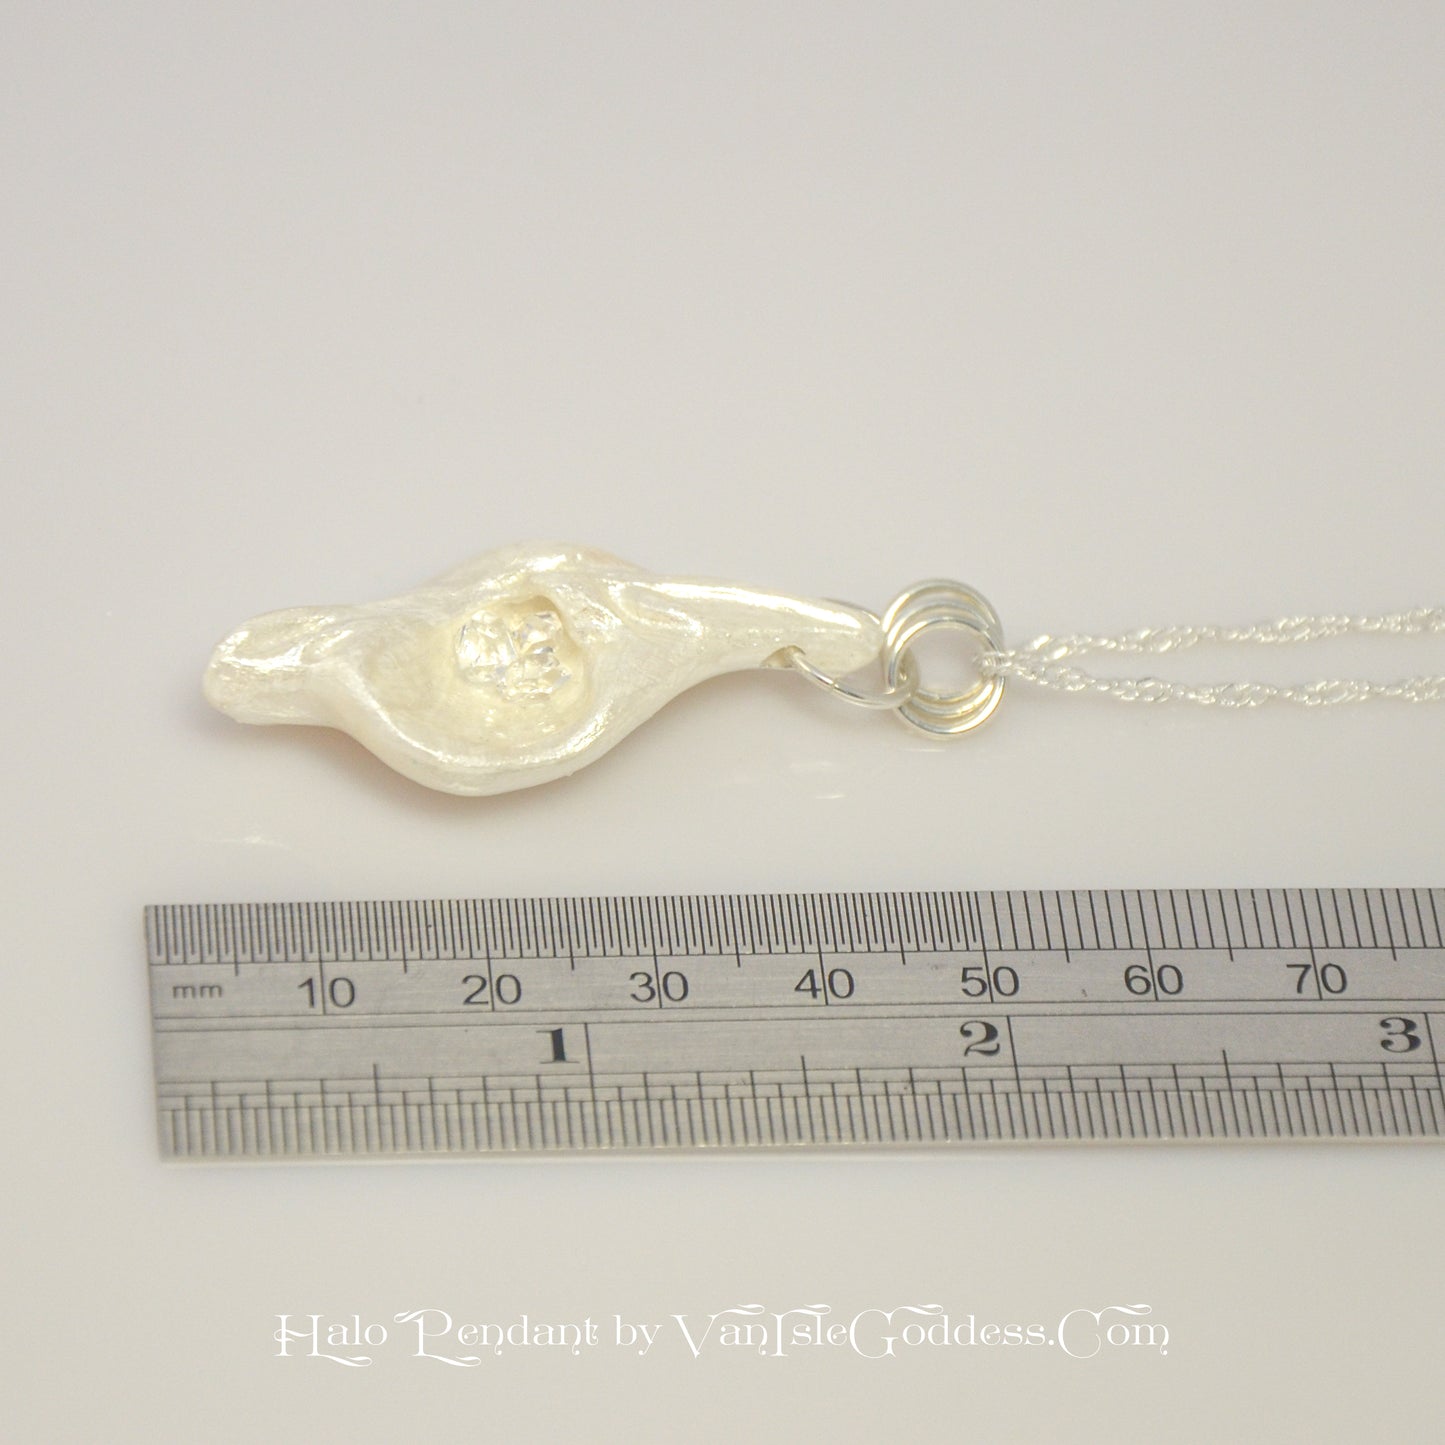 Halo natural seashell pendant with three herkimer diamonds. The pendant is shown laying along a ruler so the viewer can see the length of the pendant.